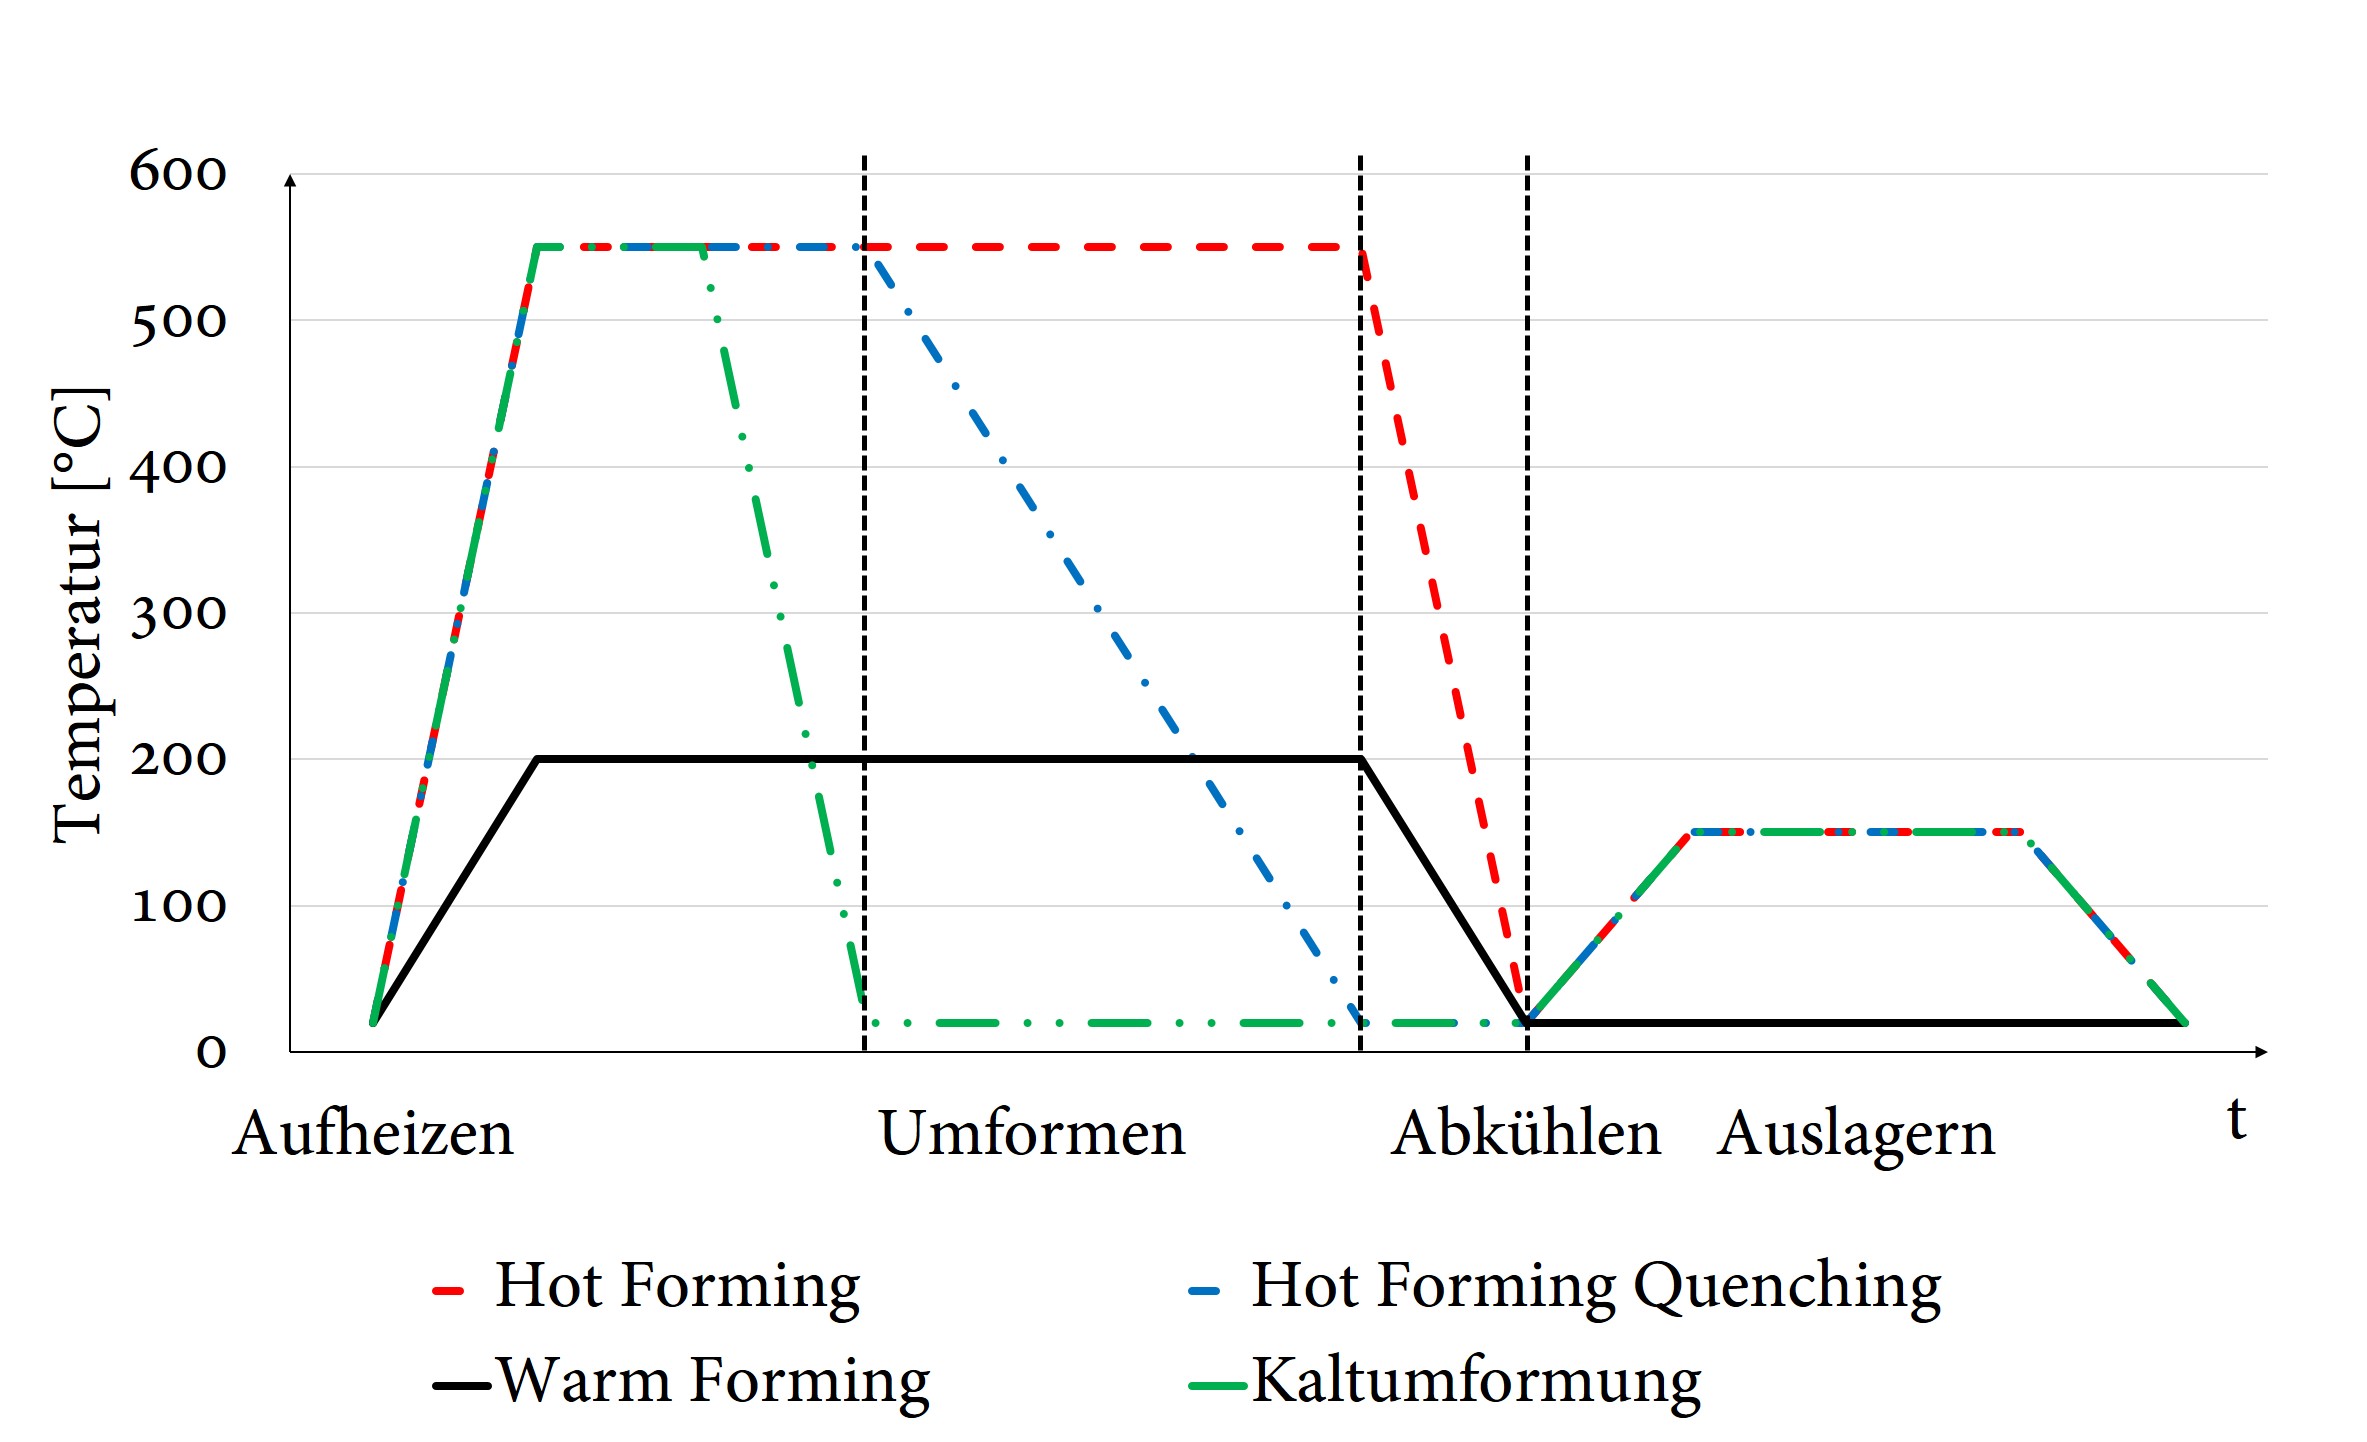 Schematic temperature curves for different hot forming processes of precipitation-hardenable aluminum alloys © IBF RWTH Aachen University